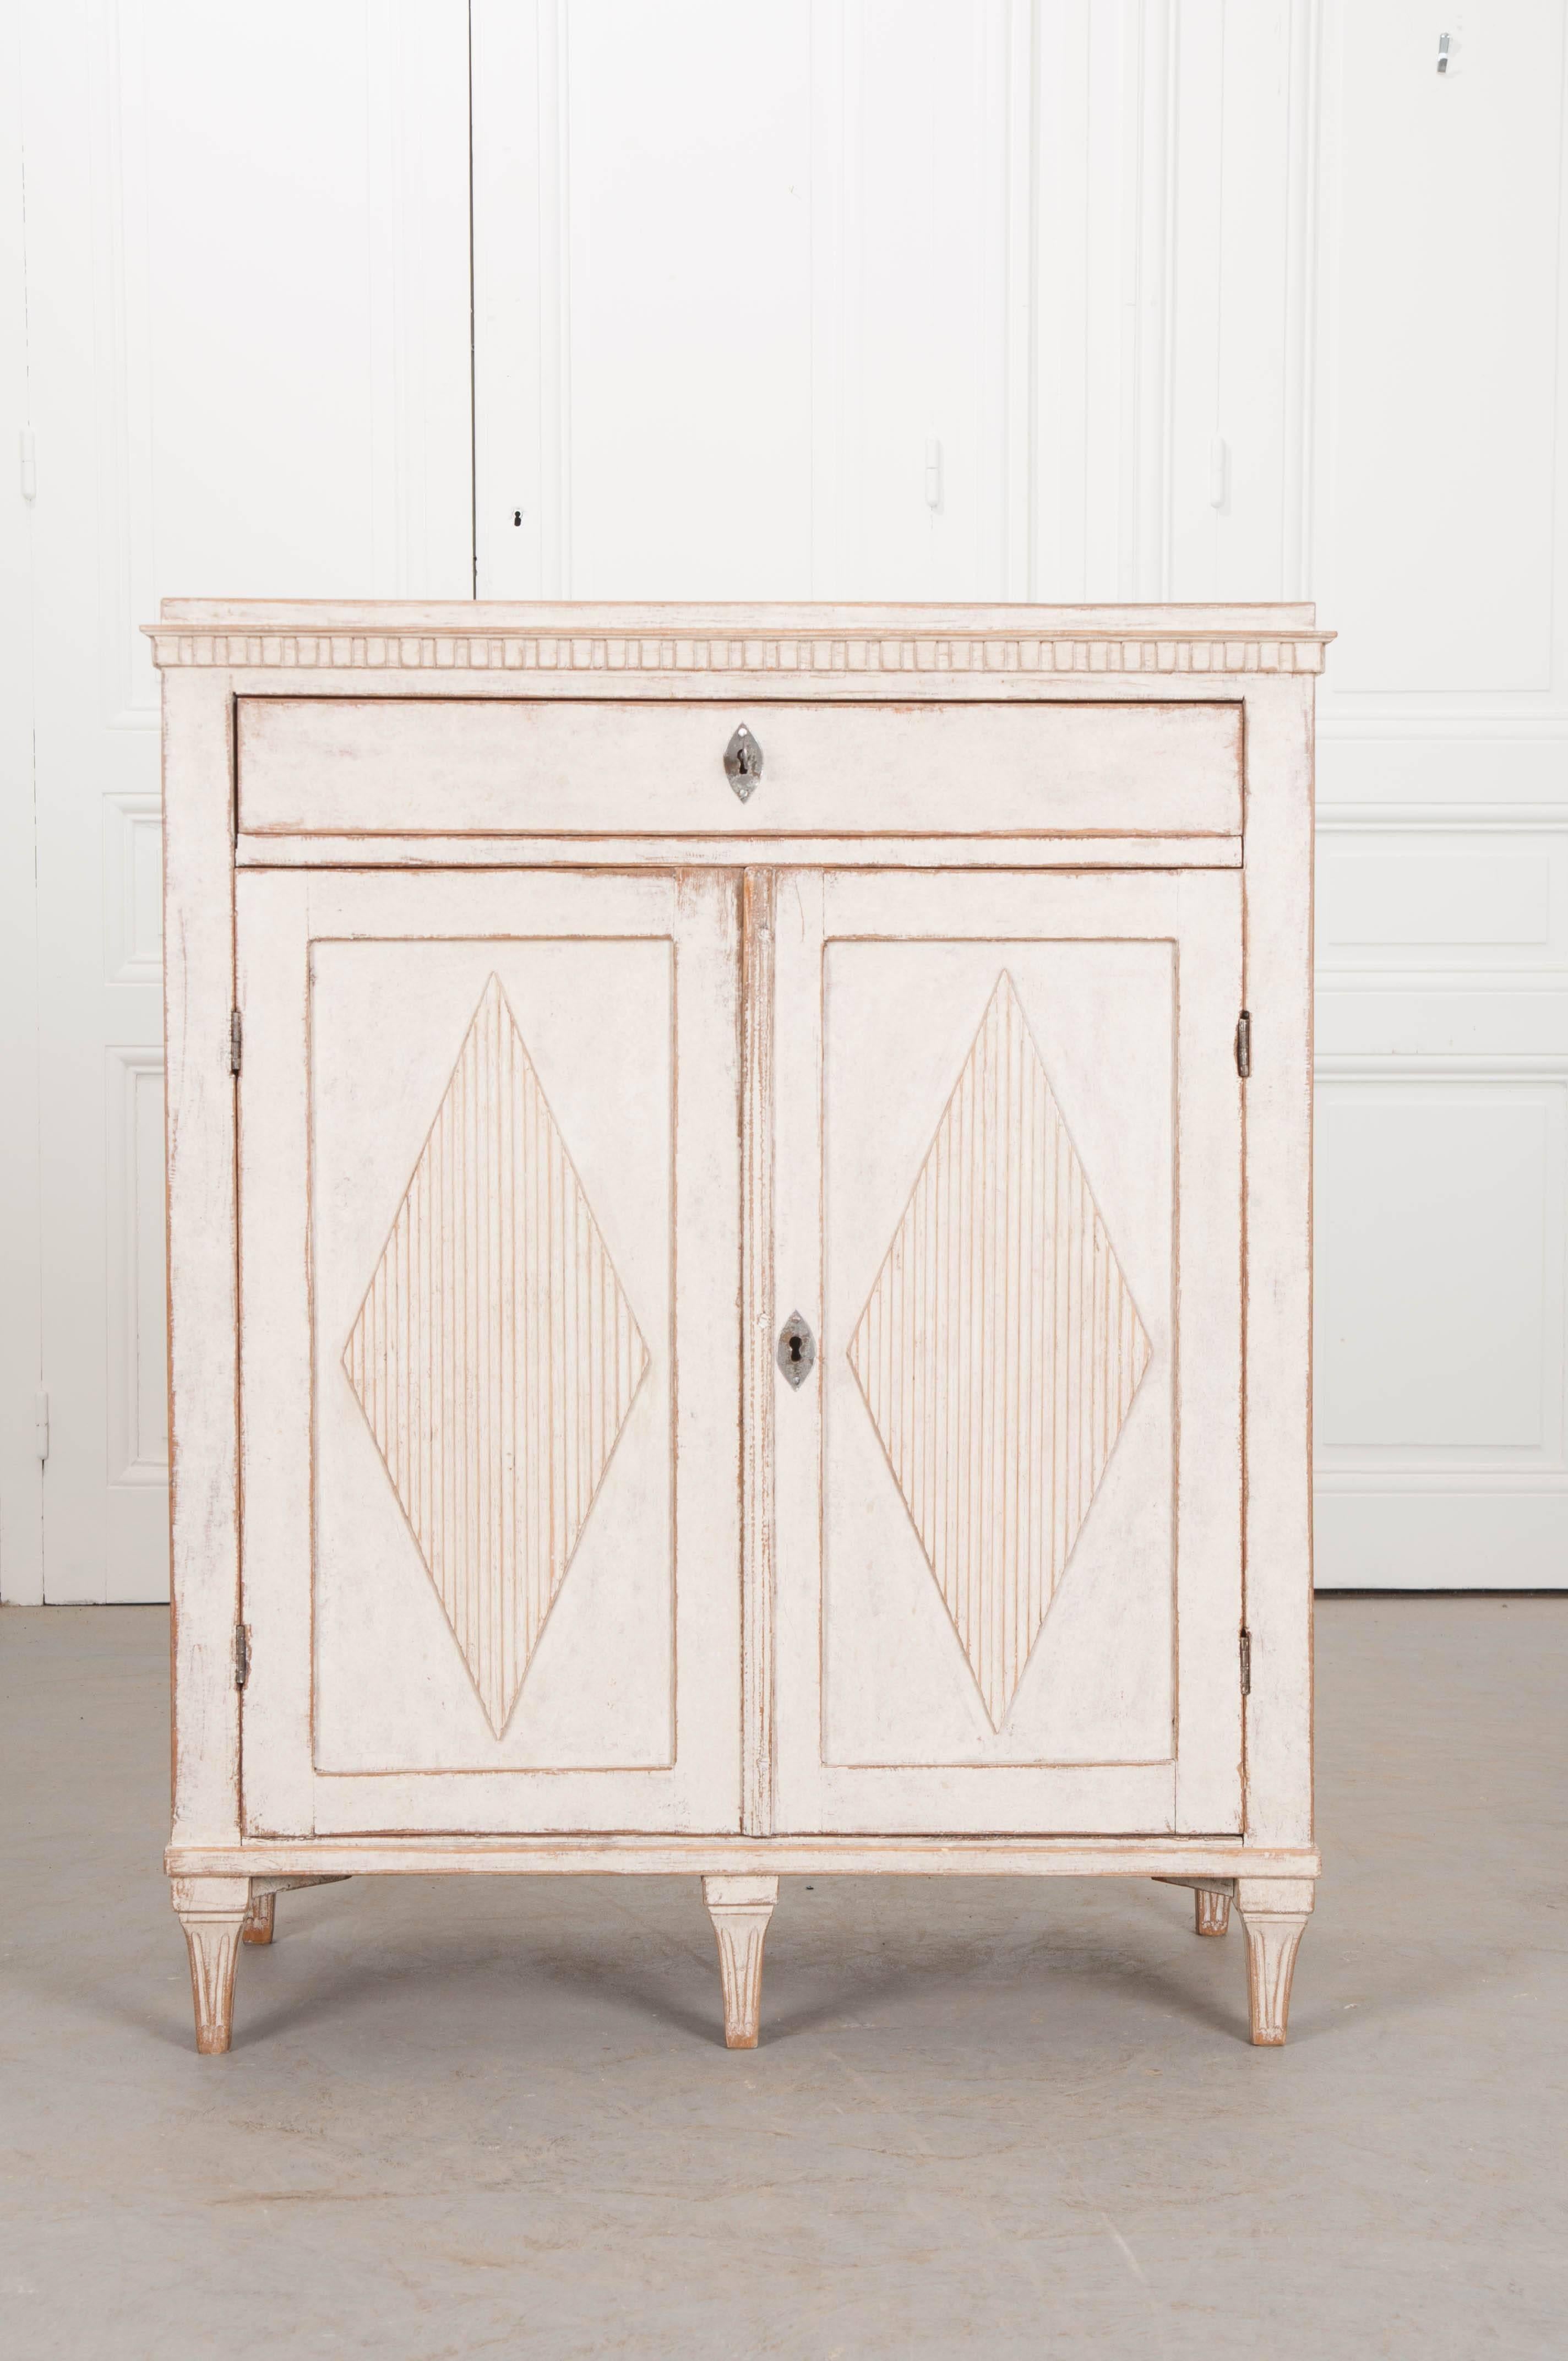 A remarkable Gustavian painted buffet, made in Sweden, towards the beginning of the 19th century. Painted a spectacular ivory-white, time has afforded the finish a patina that is simply stunning. Wonderful carved details also grace the buffet. The